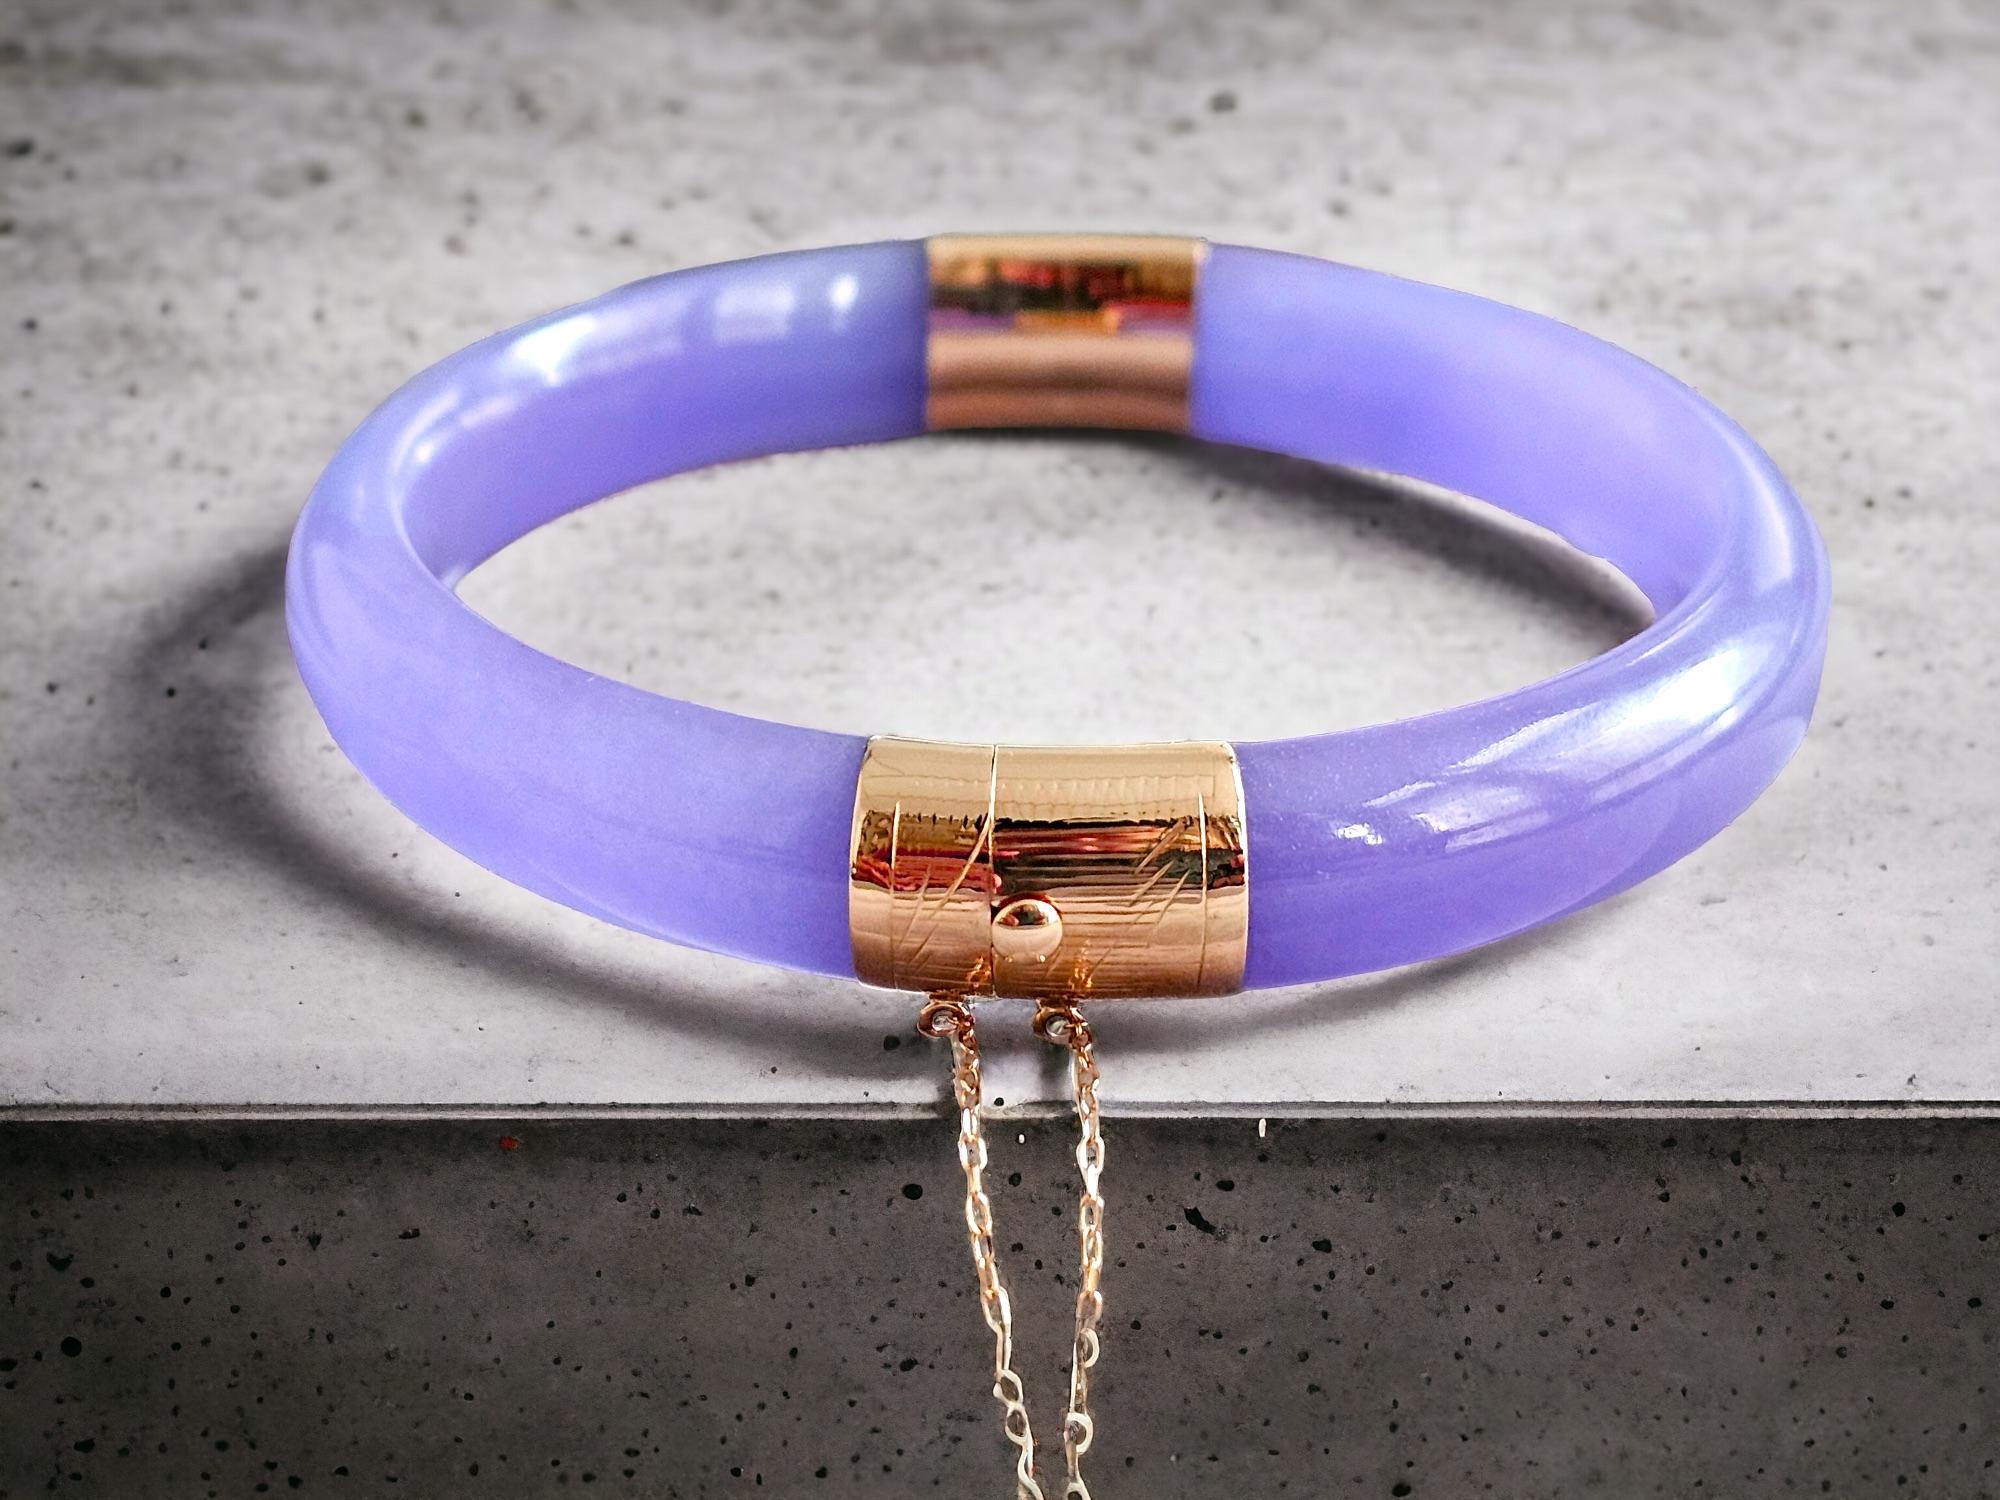 Mixed Cut Viceroy's Circular Lavender Jade Bangle Bracelet (with 14K Yellow Gold) For Sale